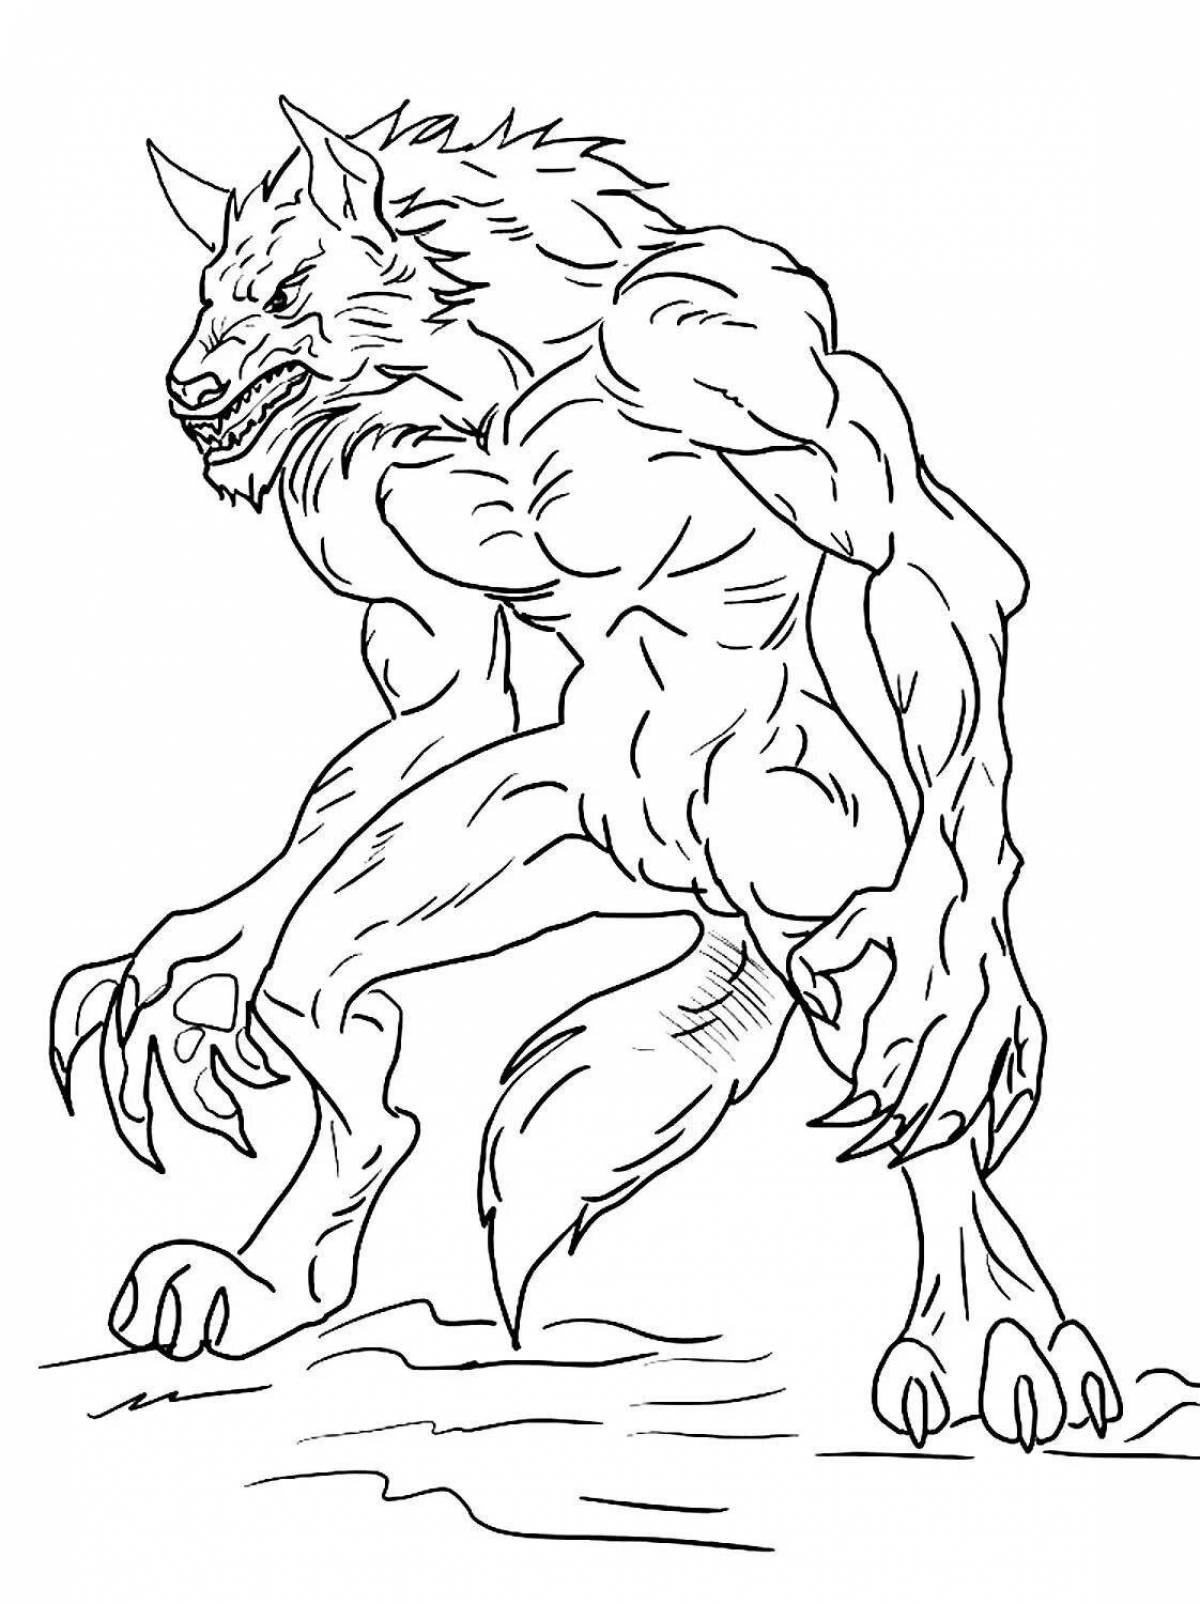 Sinister werewolf coloring page for kids